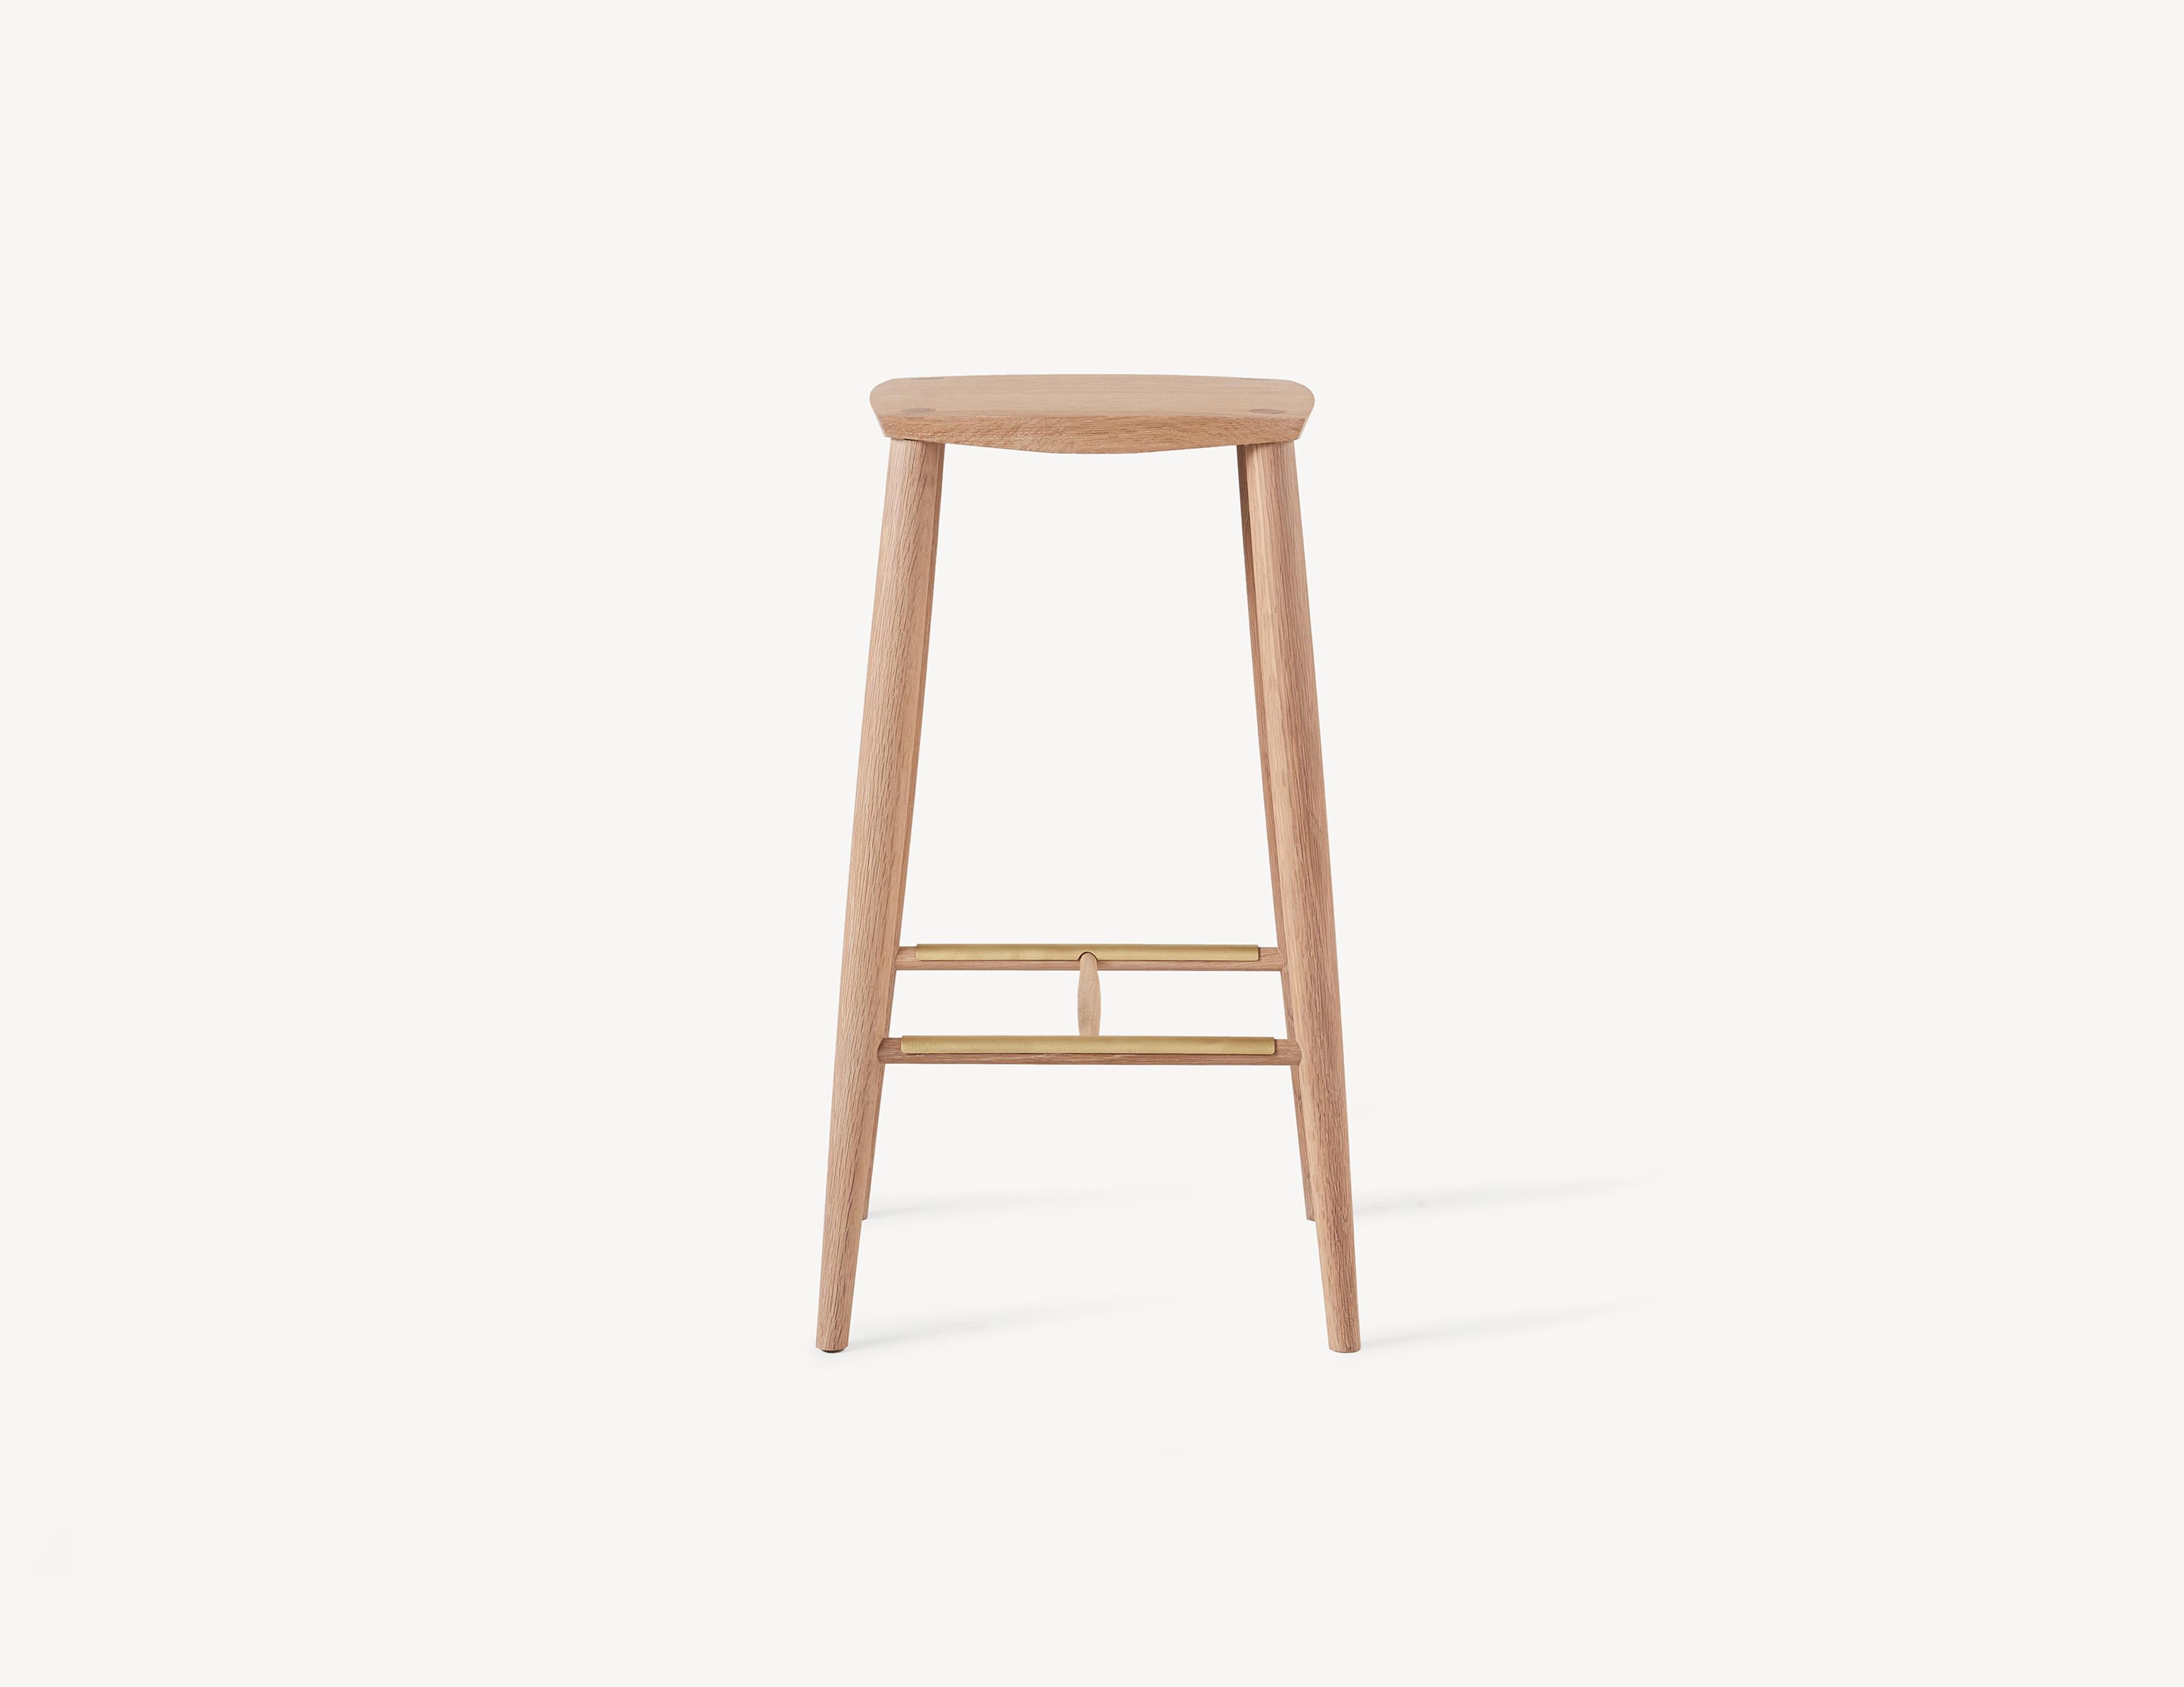 An instant Classic with a contemporary turned legs and a faceted top for comfort, this counter height stool will stand the test of time and only get better with age. A light and durable stool that features wedged through-tenons as well as pegged